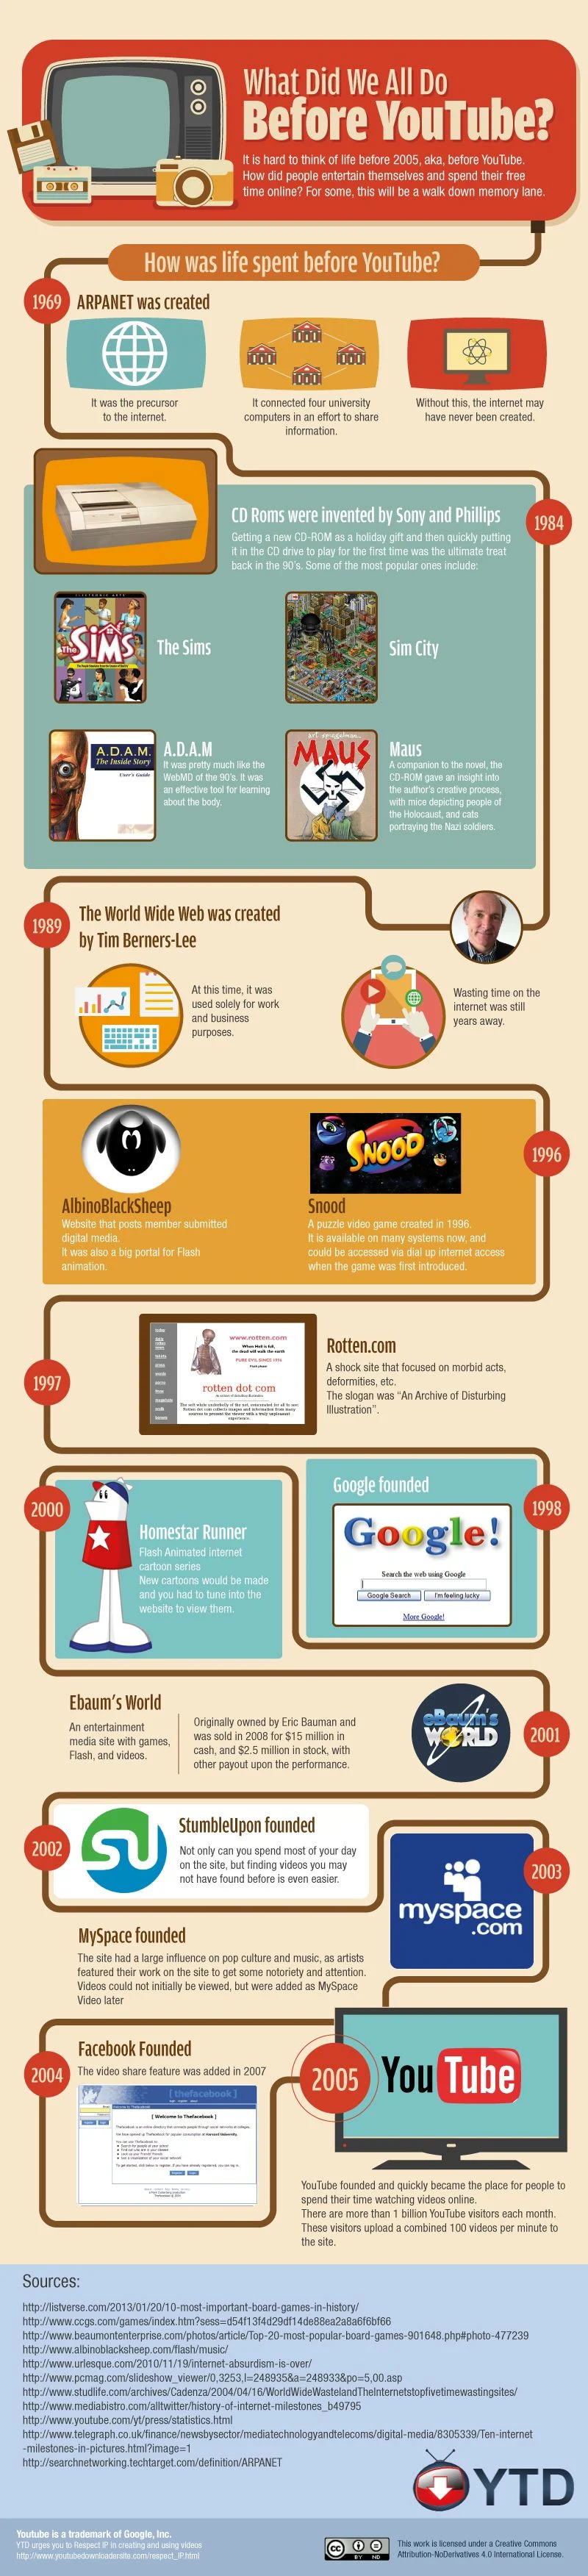 What Did We All Do Before #YouTube? - #infographic #technology